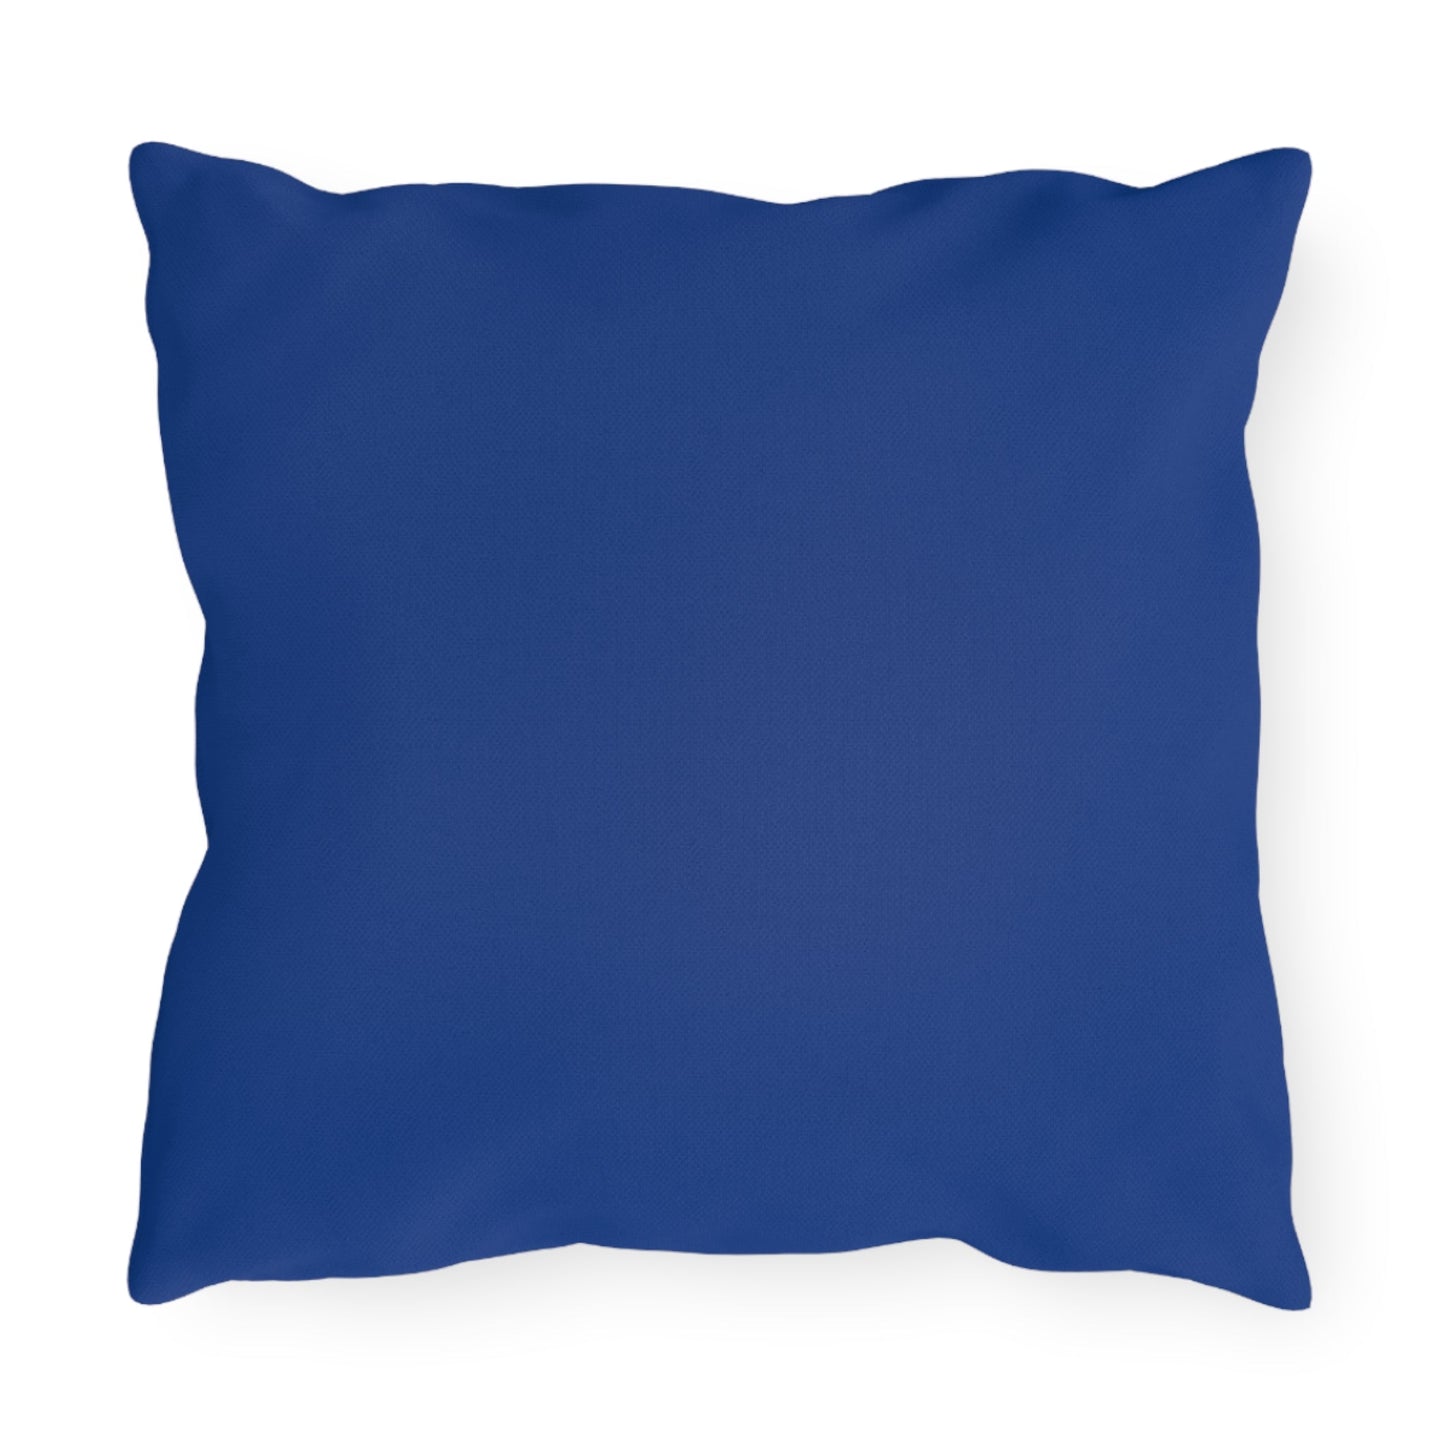 Get trendy with Outdoor Pillows - Home Decor available at Good Gift Company. Grab yours for $14 today!